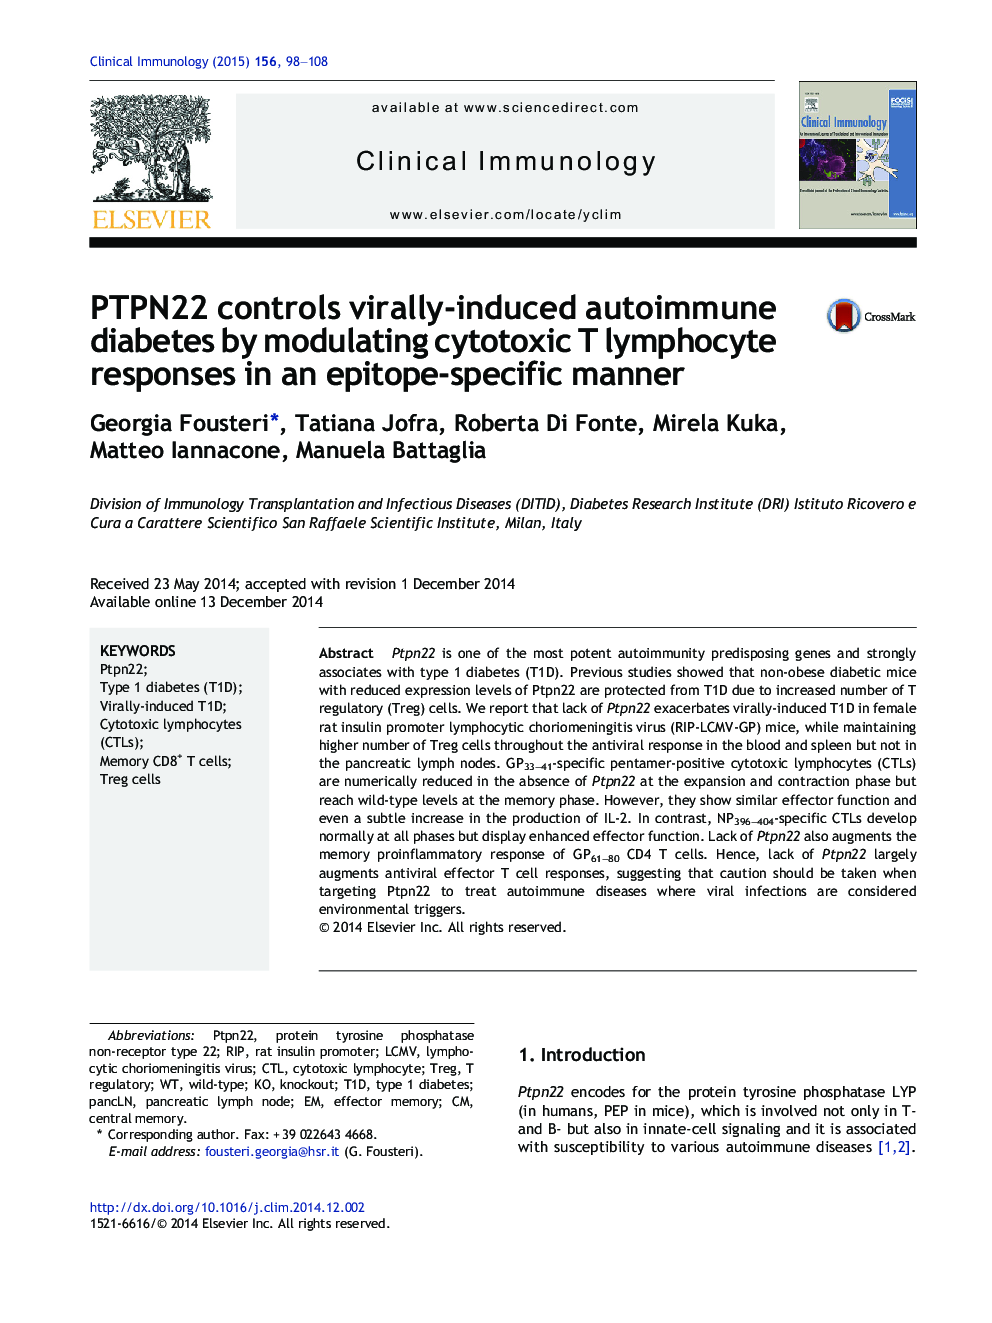 PTPN22 controls virally-induced autoimmune diabetes by modulating cytotoxic T lymphocyte responses in an epitope-specific manner